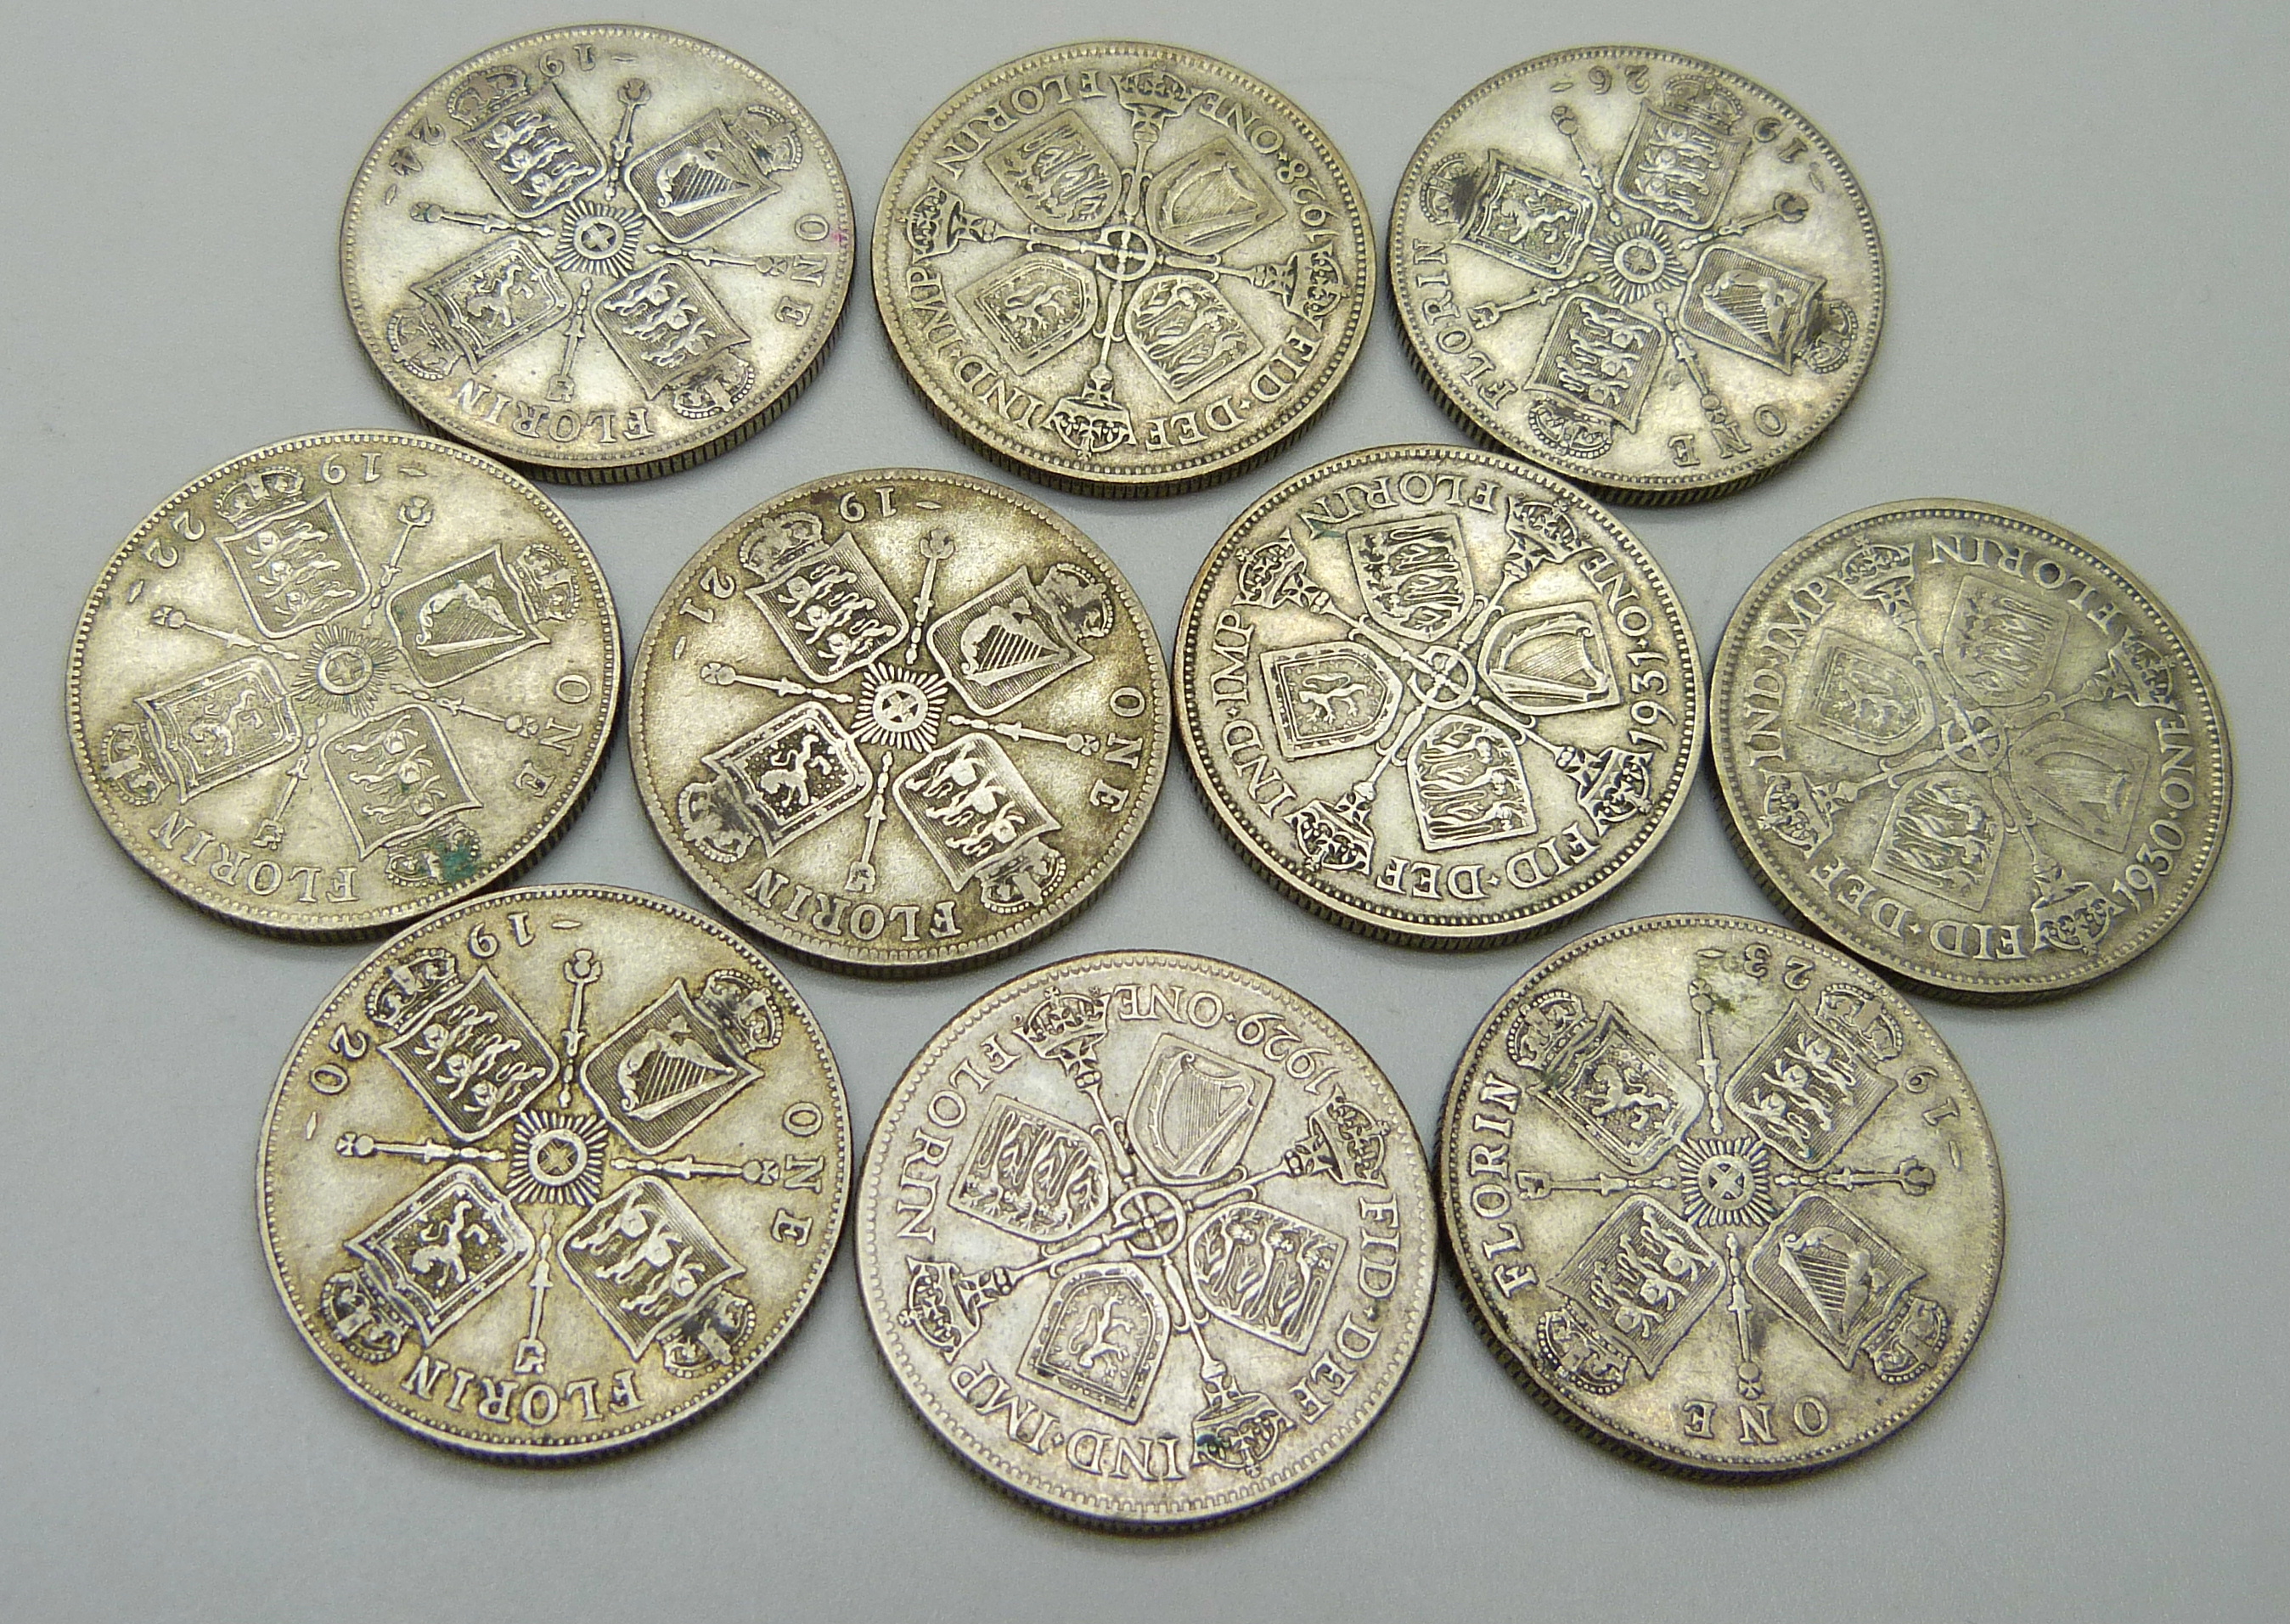 Coins; ten silver florins, (1920 to 1924, 1926, 1928 to 1931, rare dates 1924 and 1926), 112.1g - Image 2 of 2